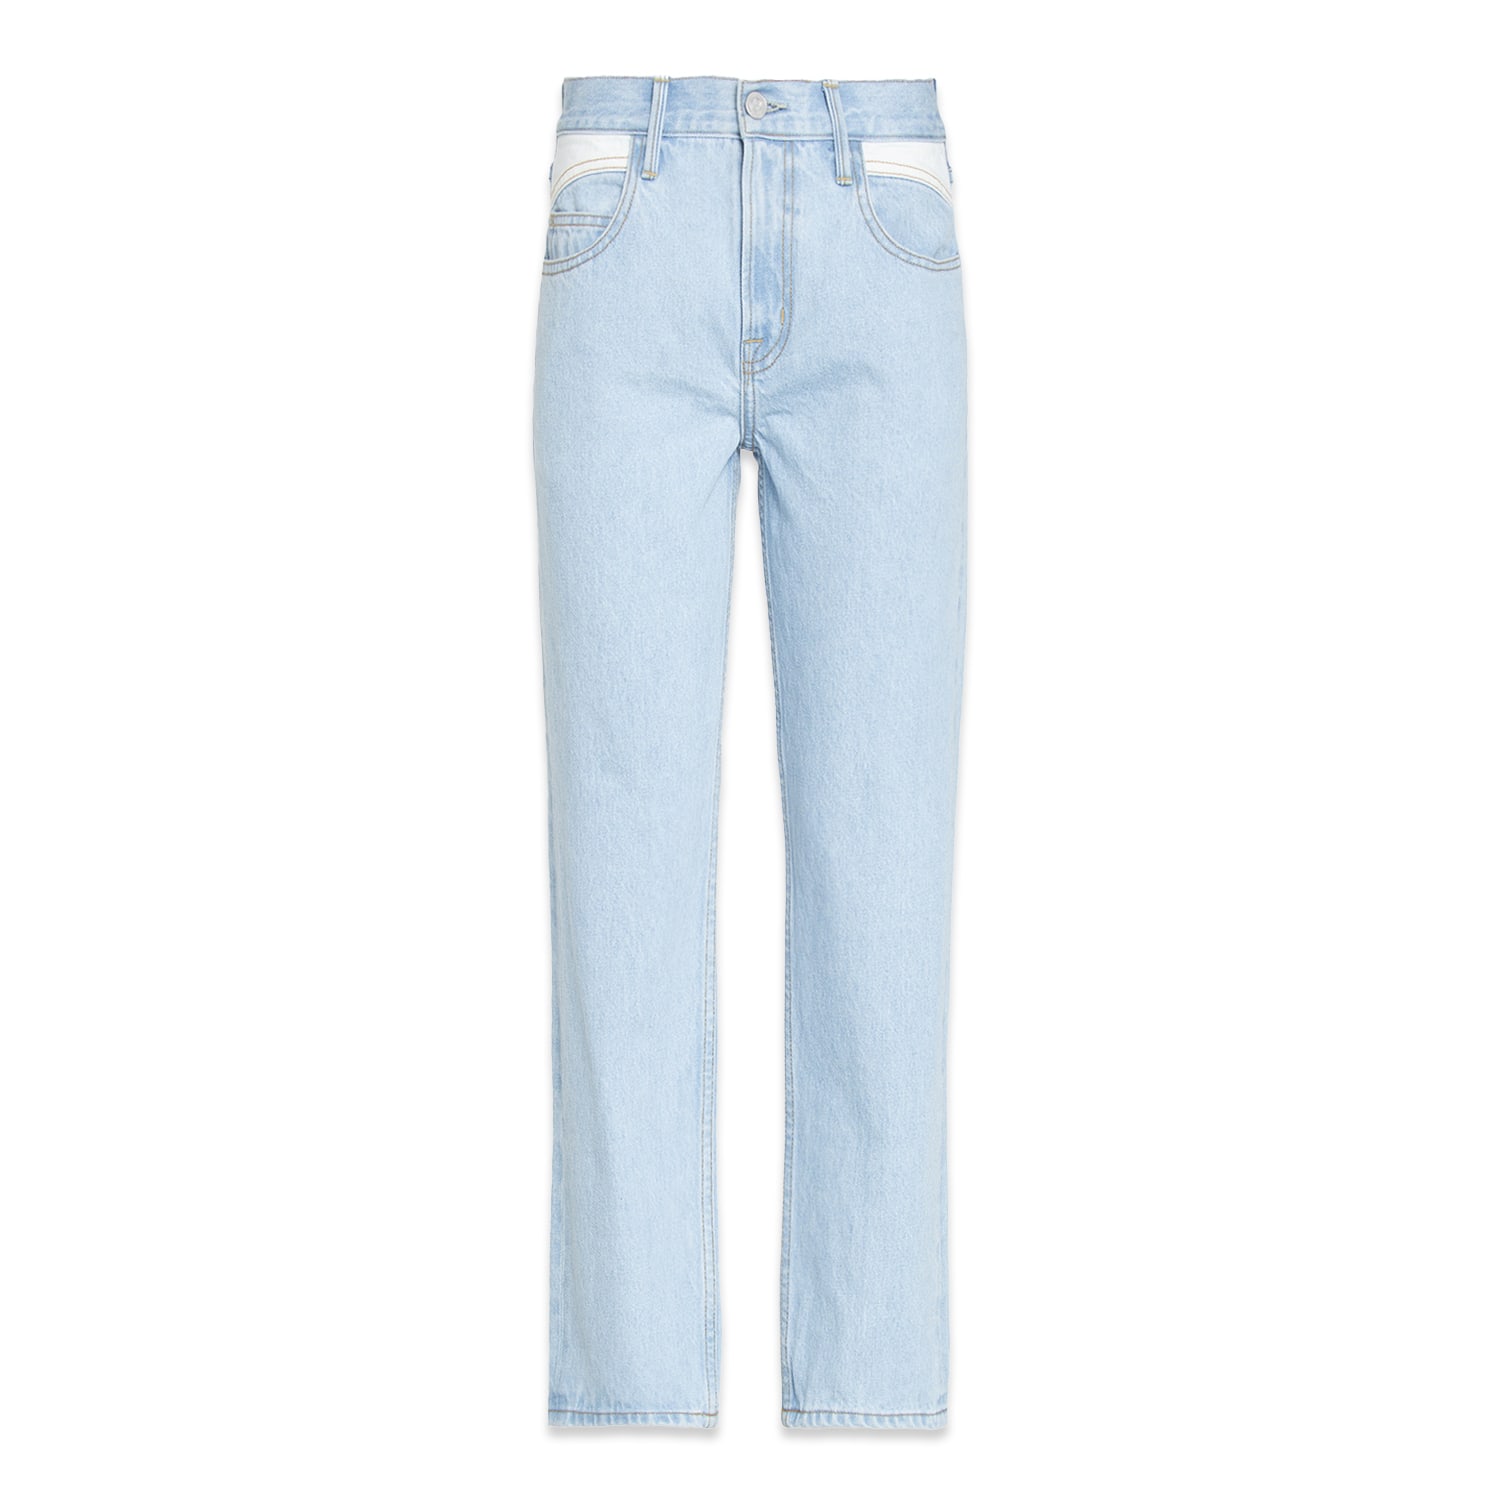 Shop Noend Denim Blue Elena Relaxed Tapered